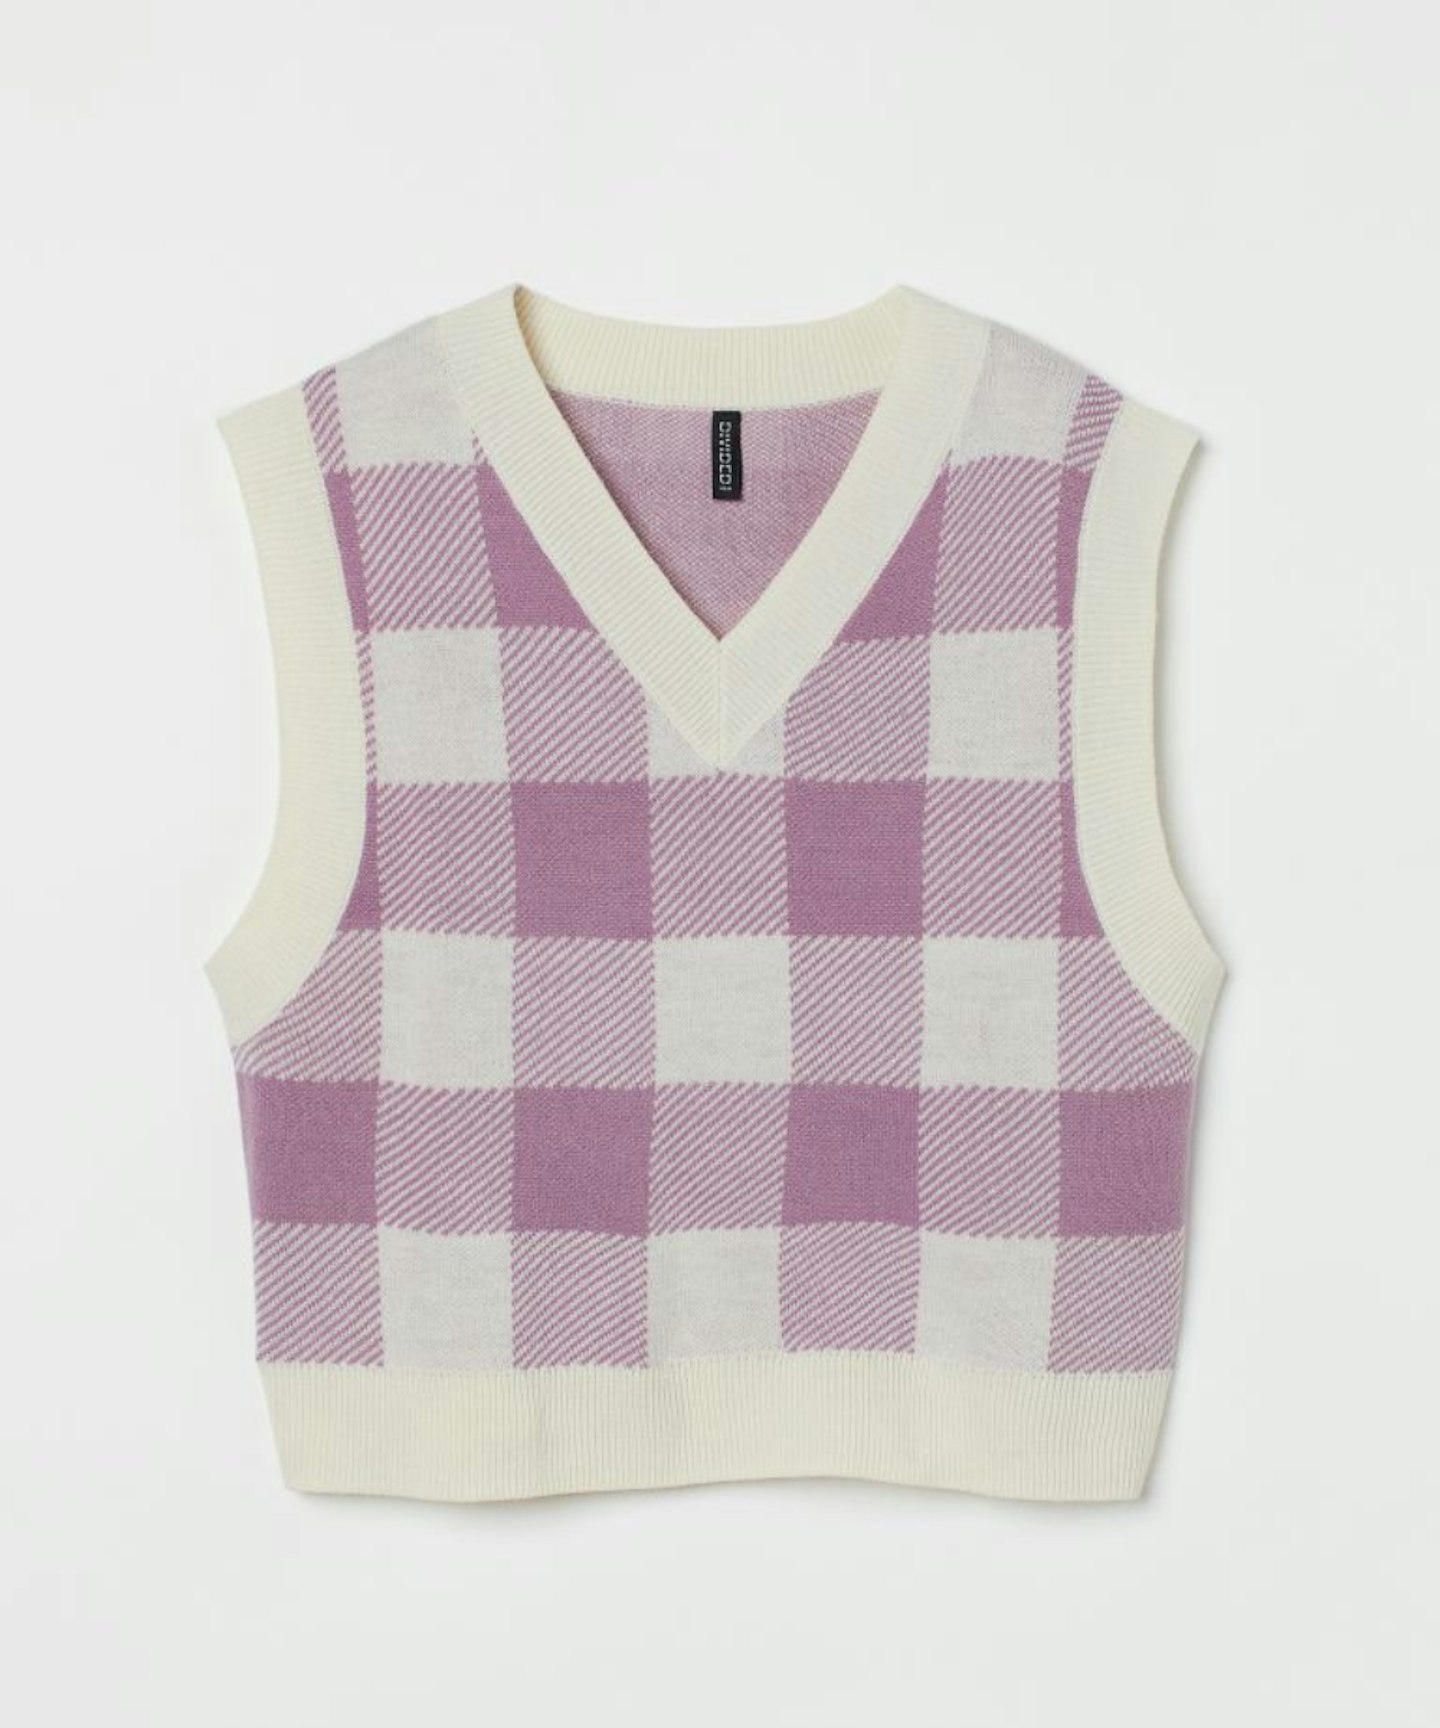 H&M Knitted Sweater Vest